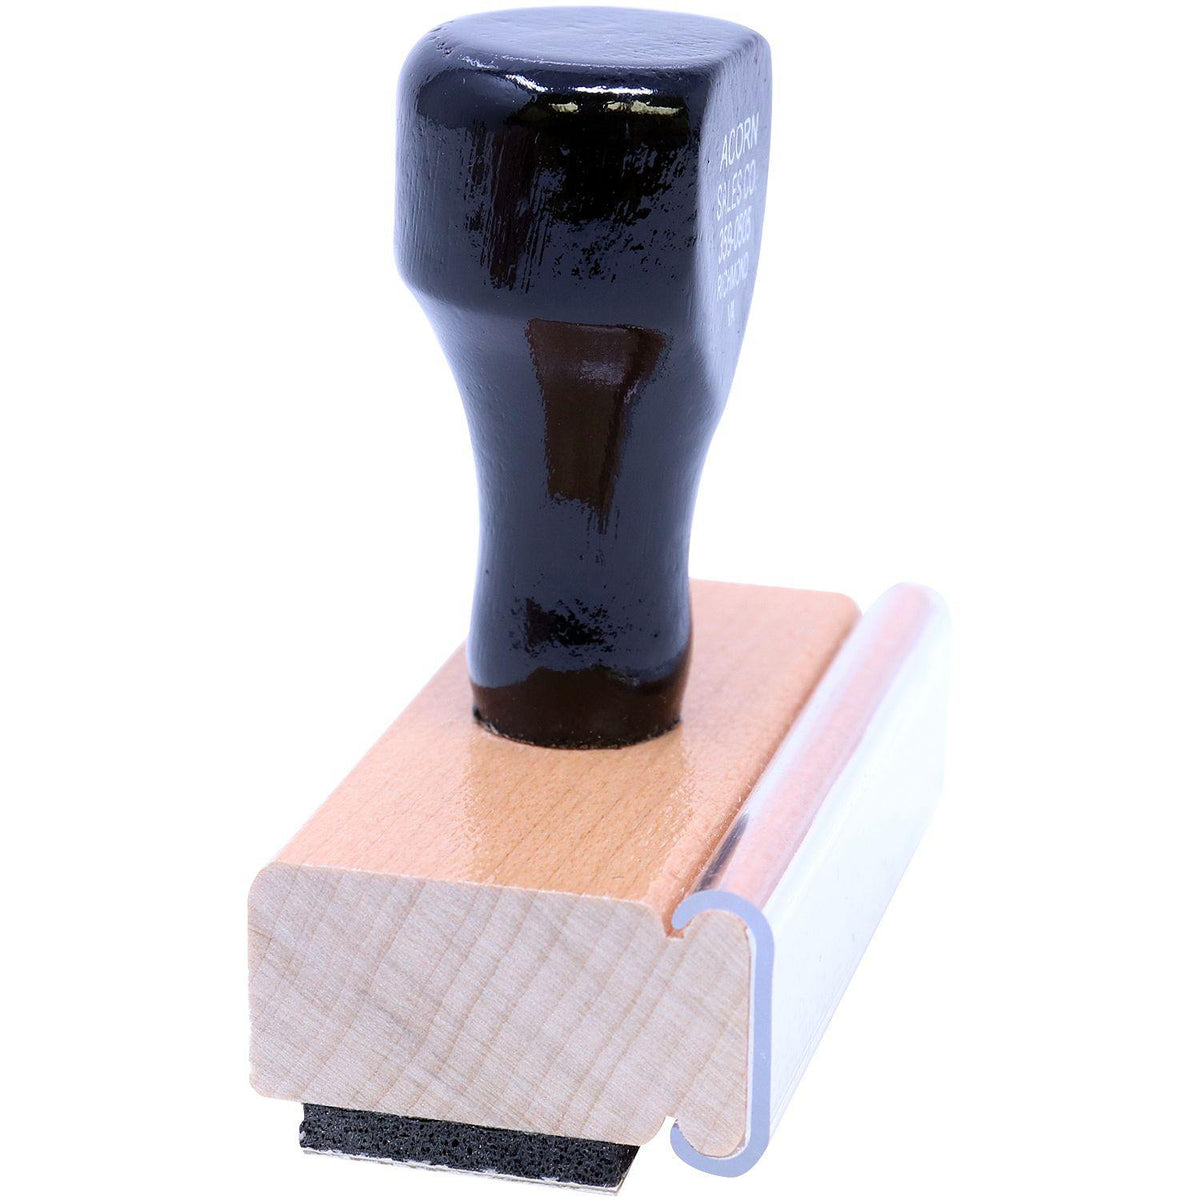 Side View of Deceased Rubber Stamp at an Angle